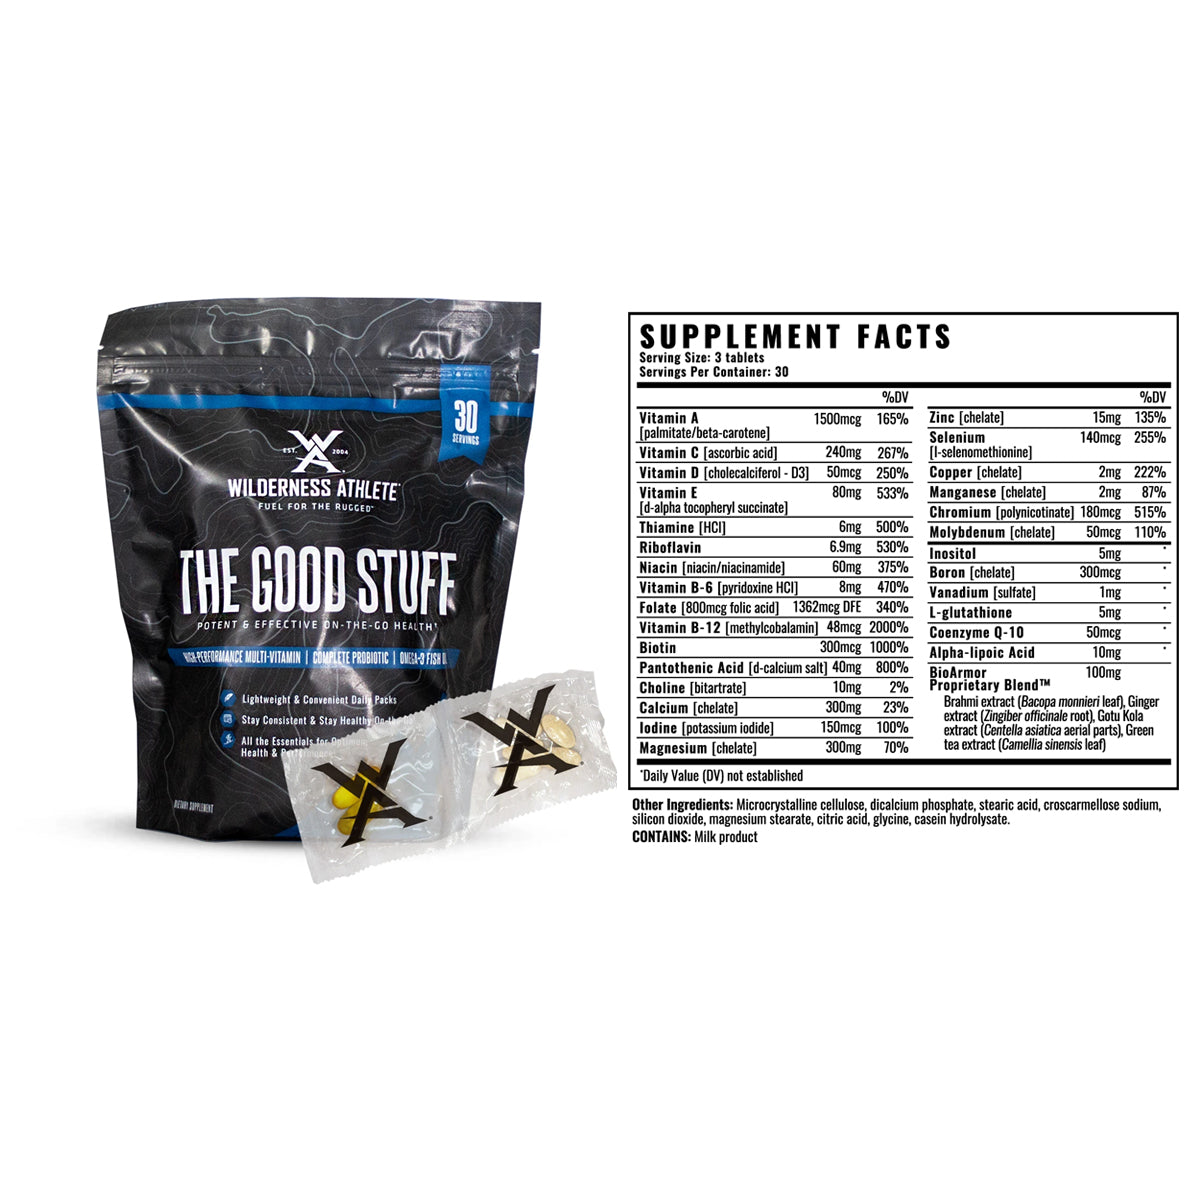 Wilderness Athlete The Good Stuff in  by GOHUNT | Wilderness Athlete - GOHUNT Shop